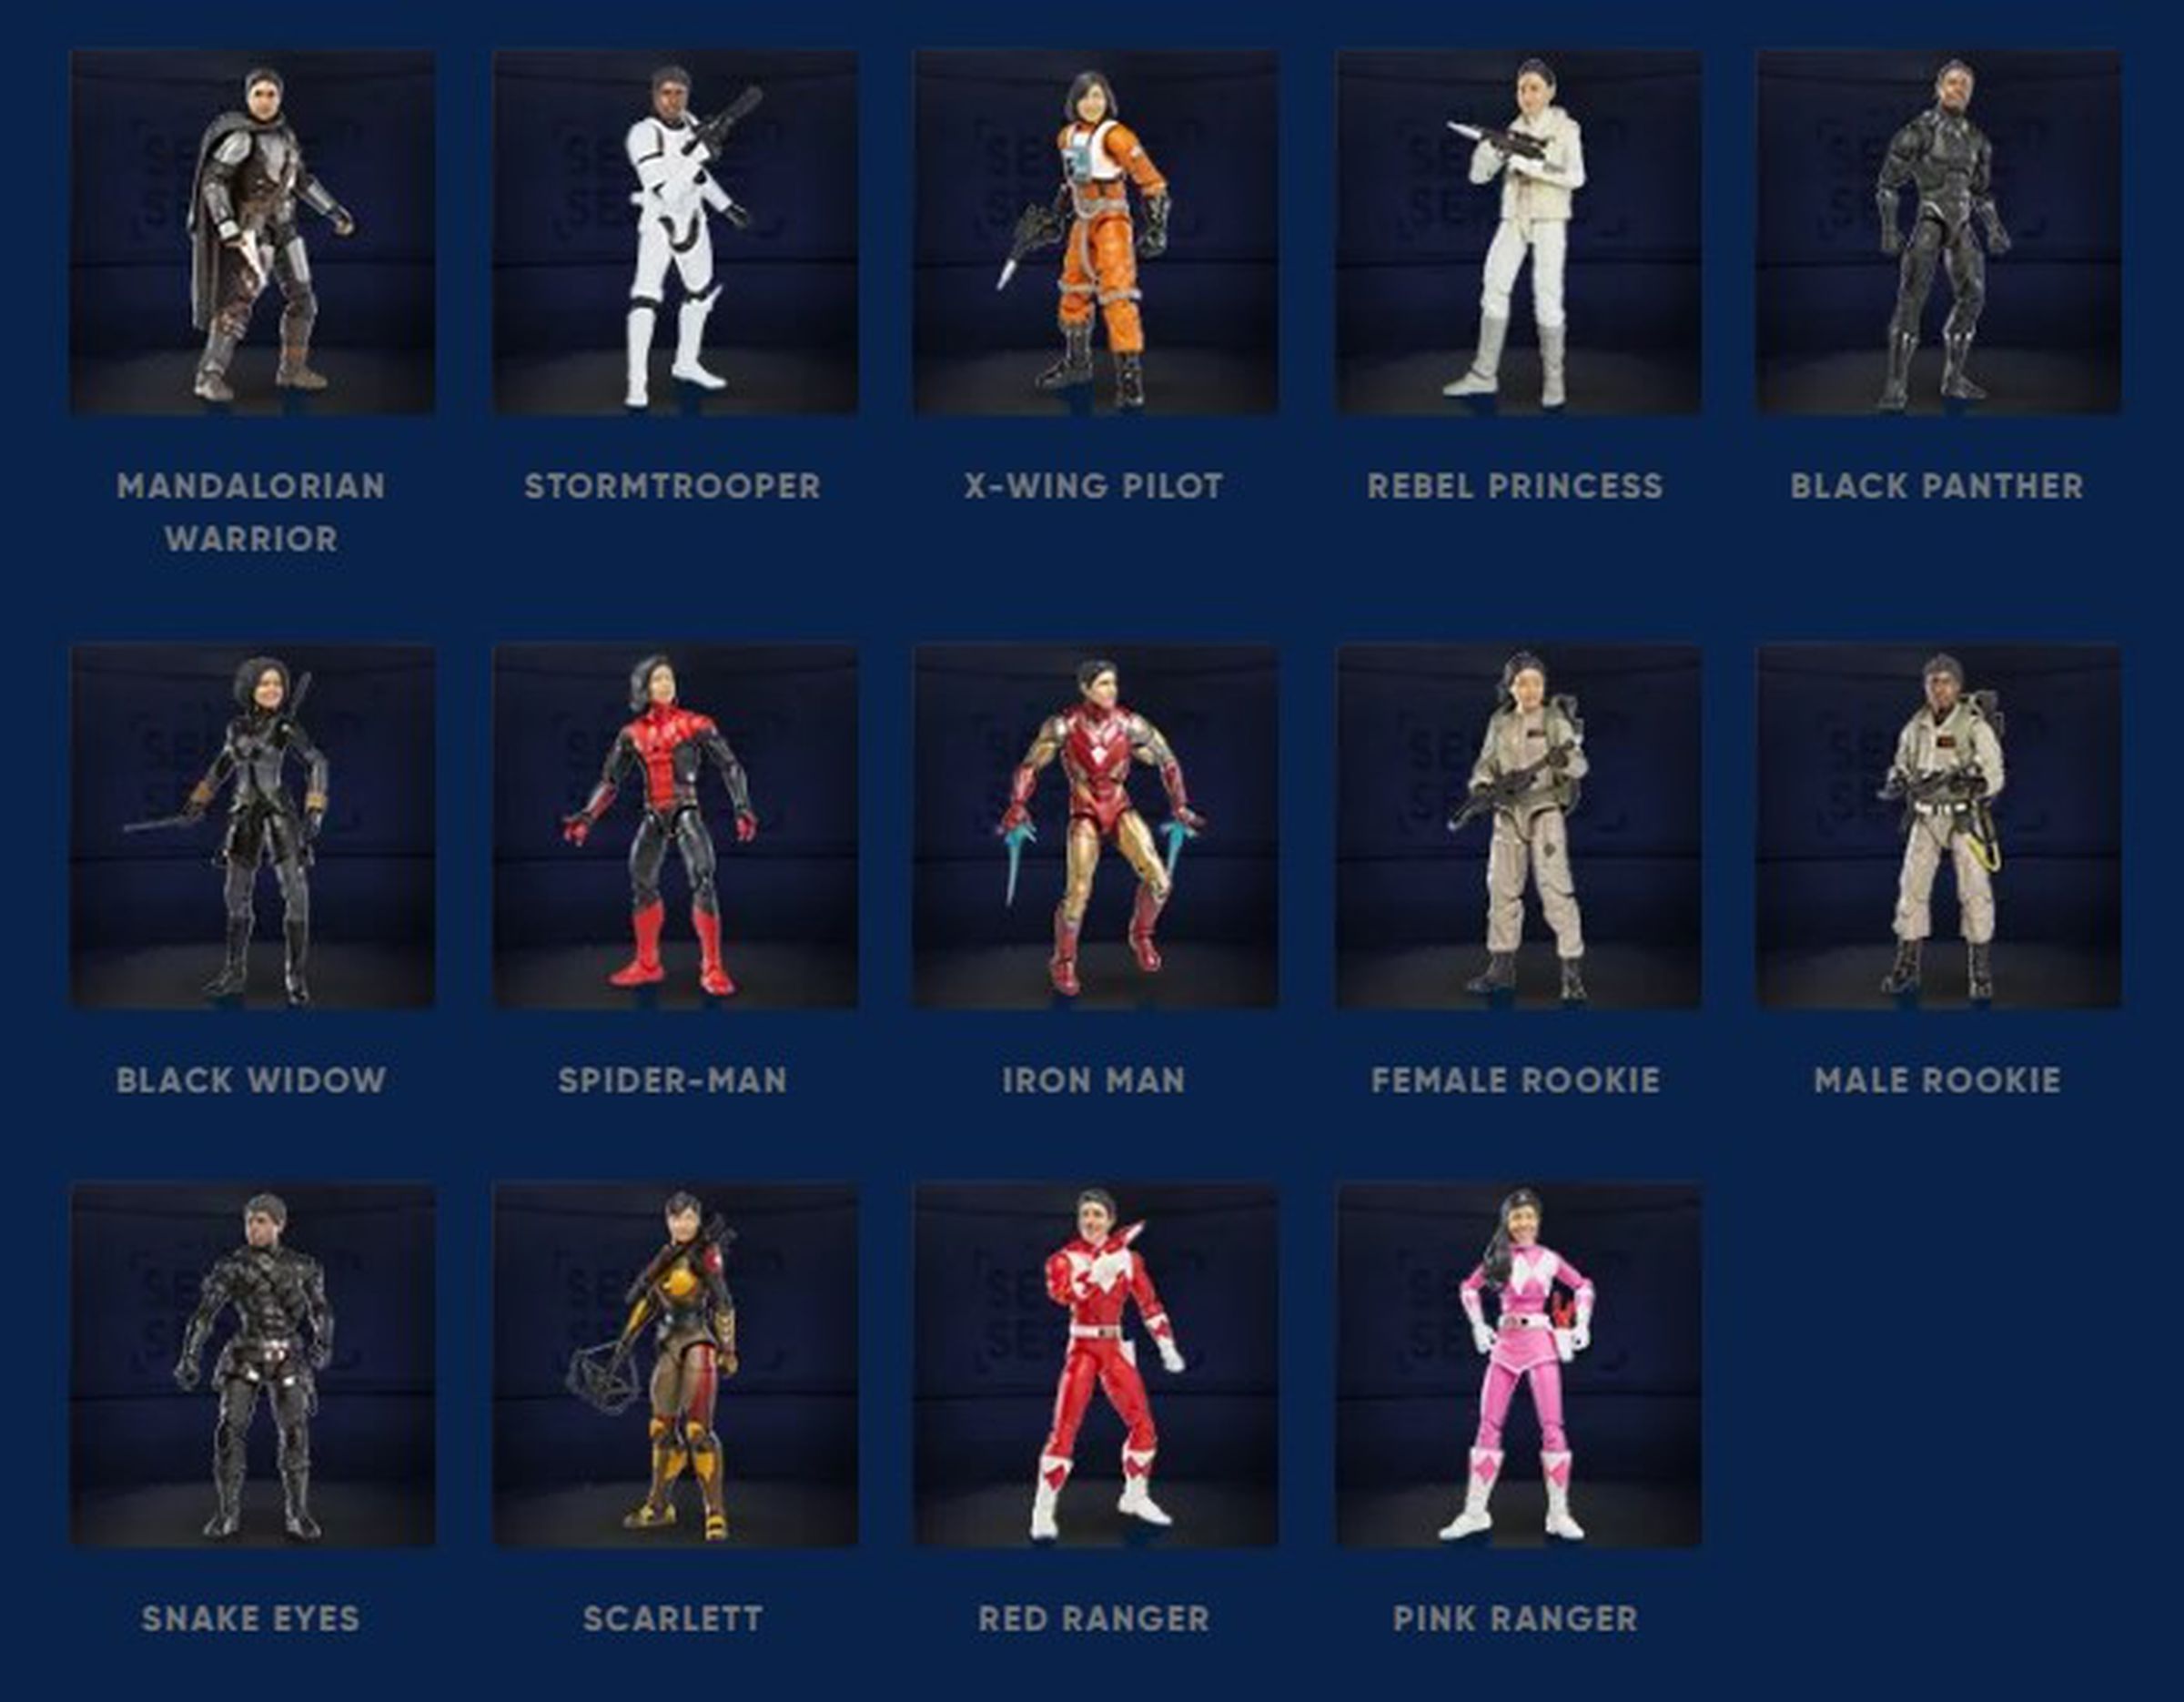 Screenshot of the available figures, including Mandalorian warrior, Stormtrooper, X-Wing pilot, rebel princess, Black Panther, Black Widow, Spider-Man, Iron Man, female rookie, male rookie, Snake Eyes, Scarlett, Red Ranger, and Pink Ranger.